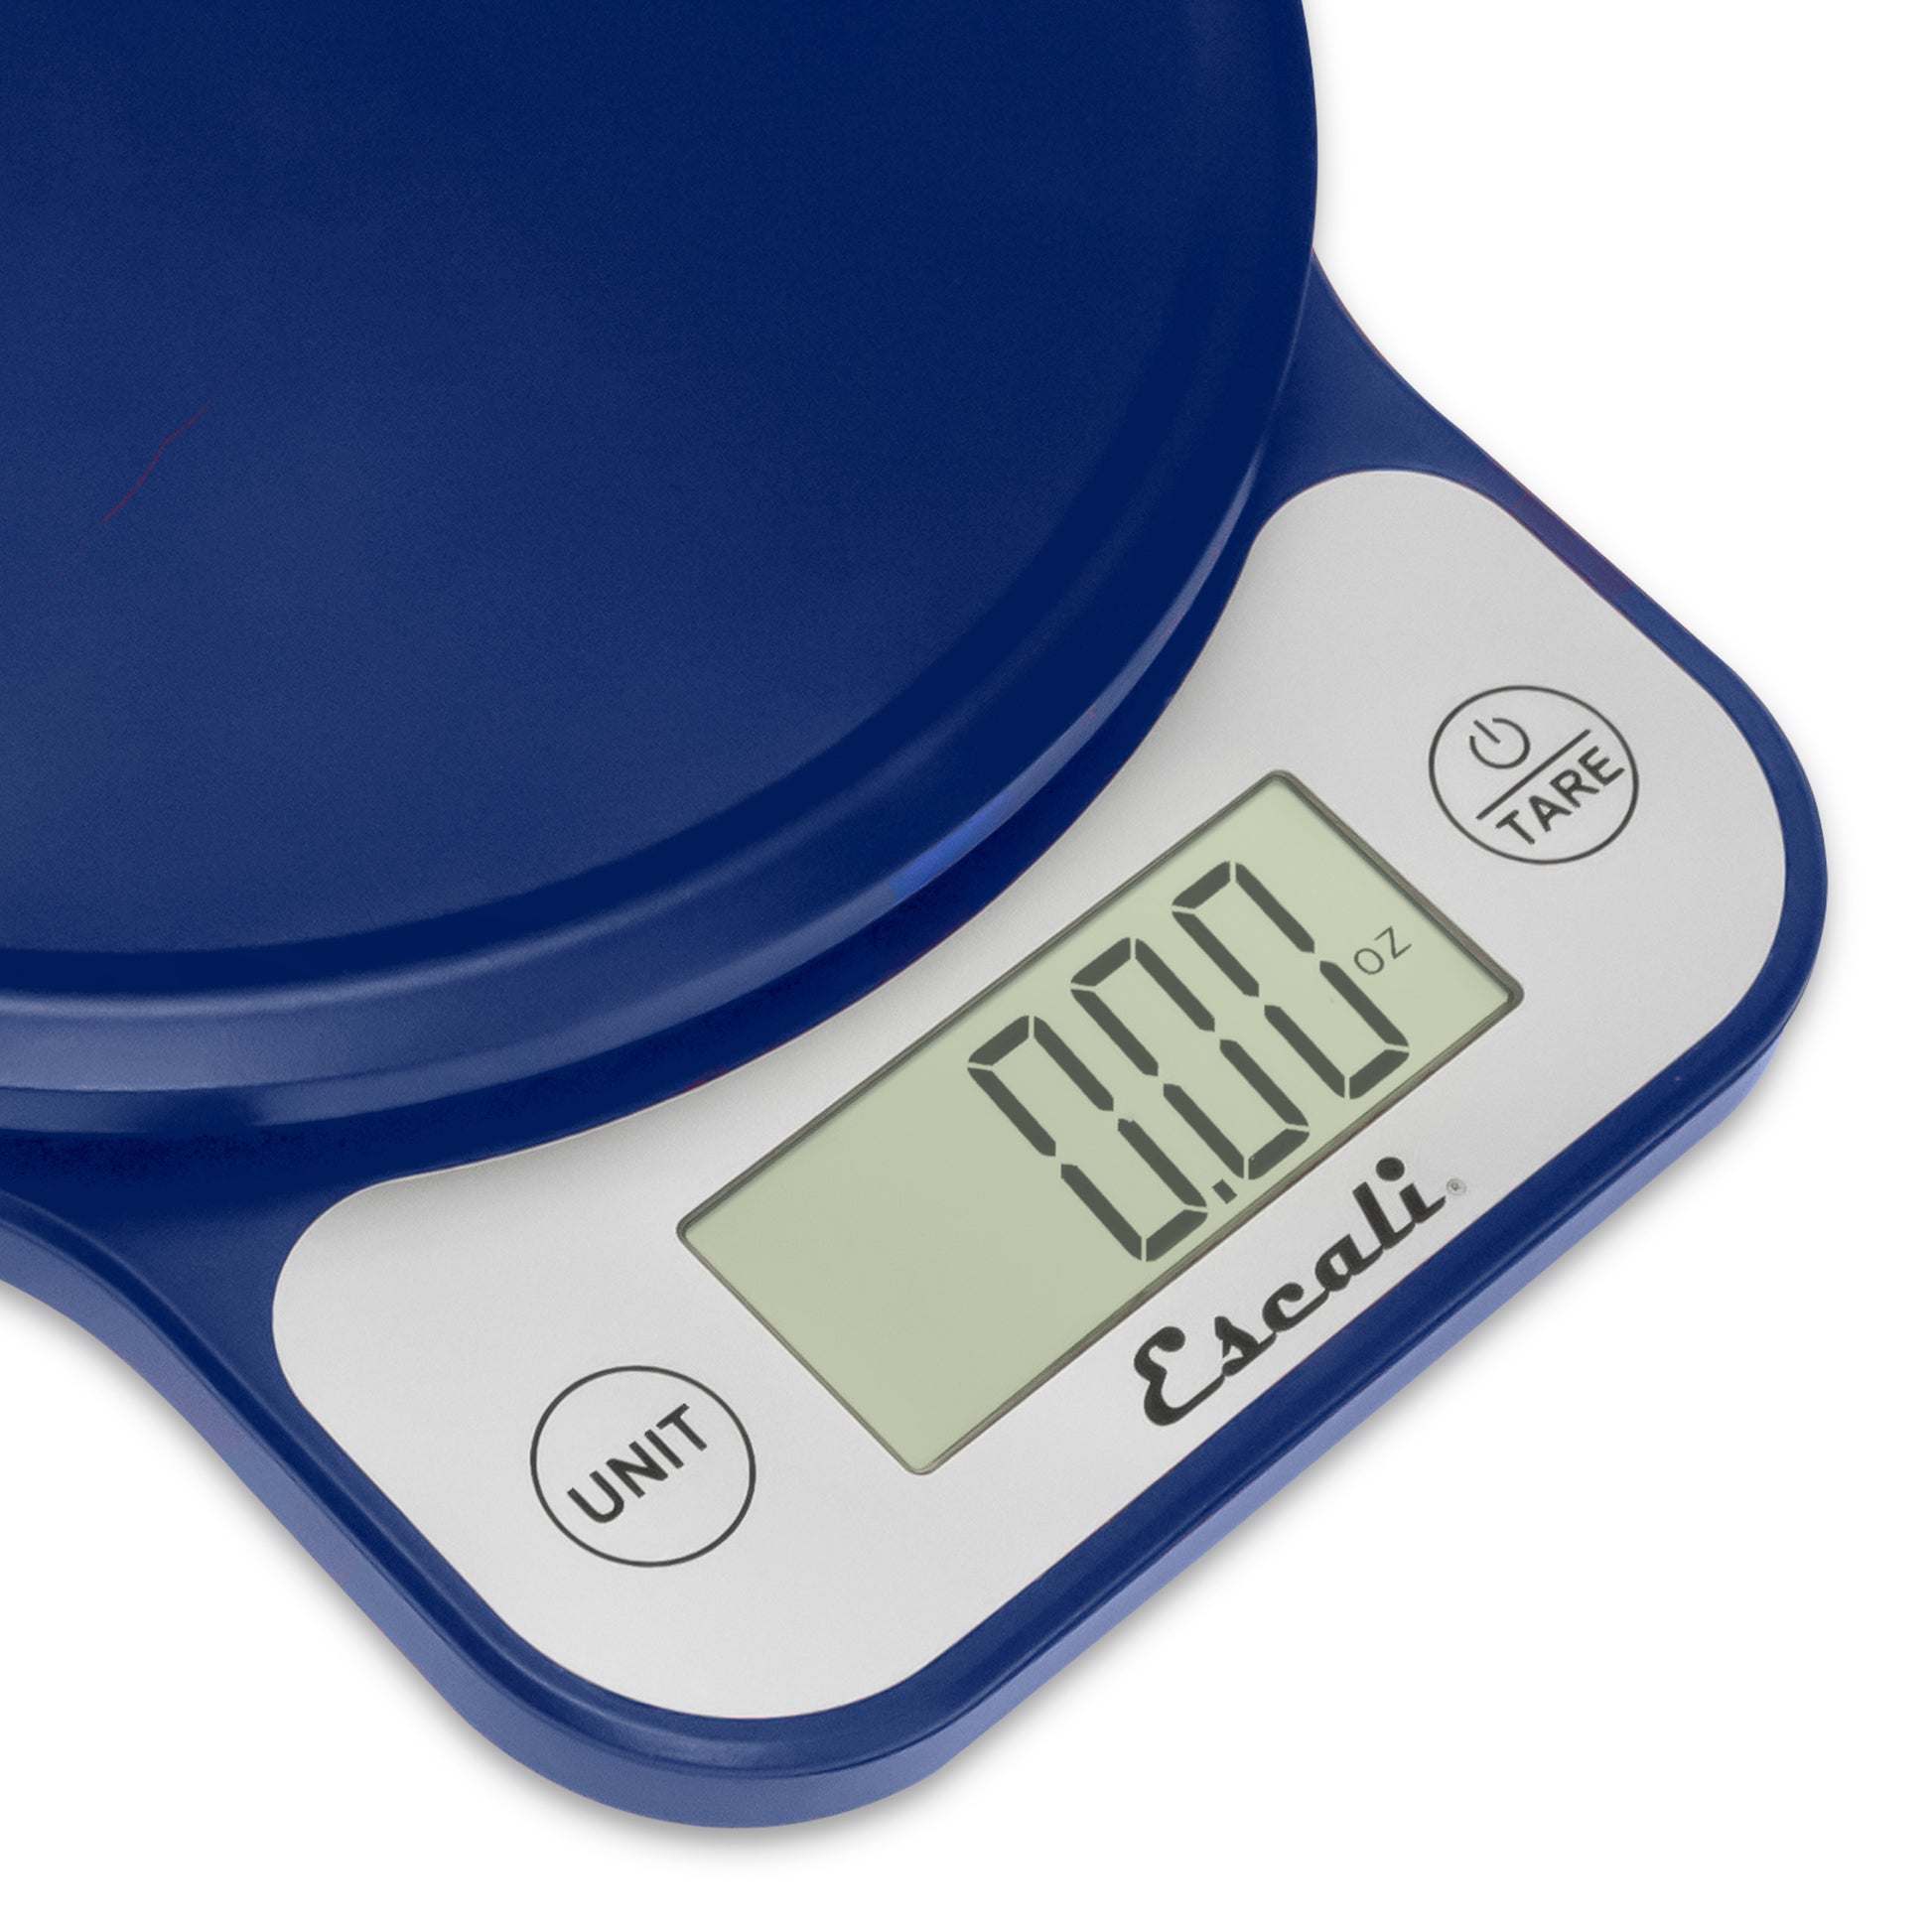 A closeup photo of the display on a blue Telero Digital Kitchen Scale.